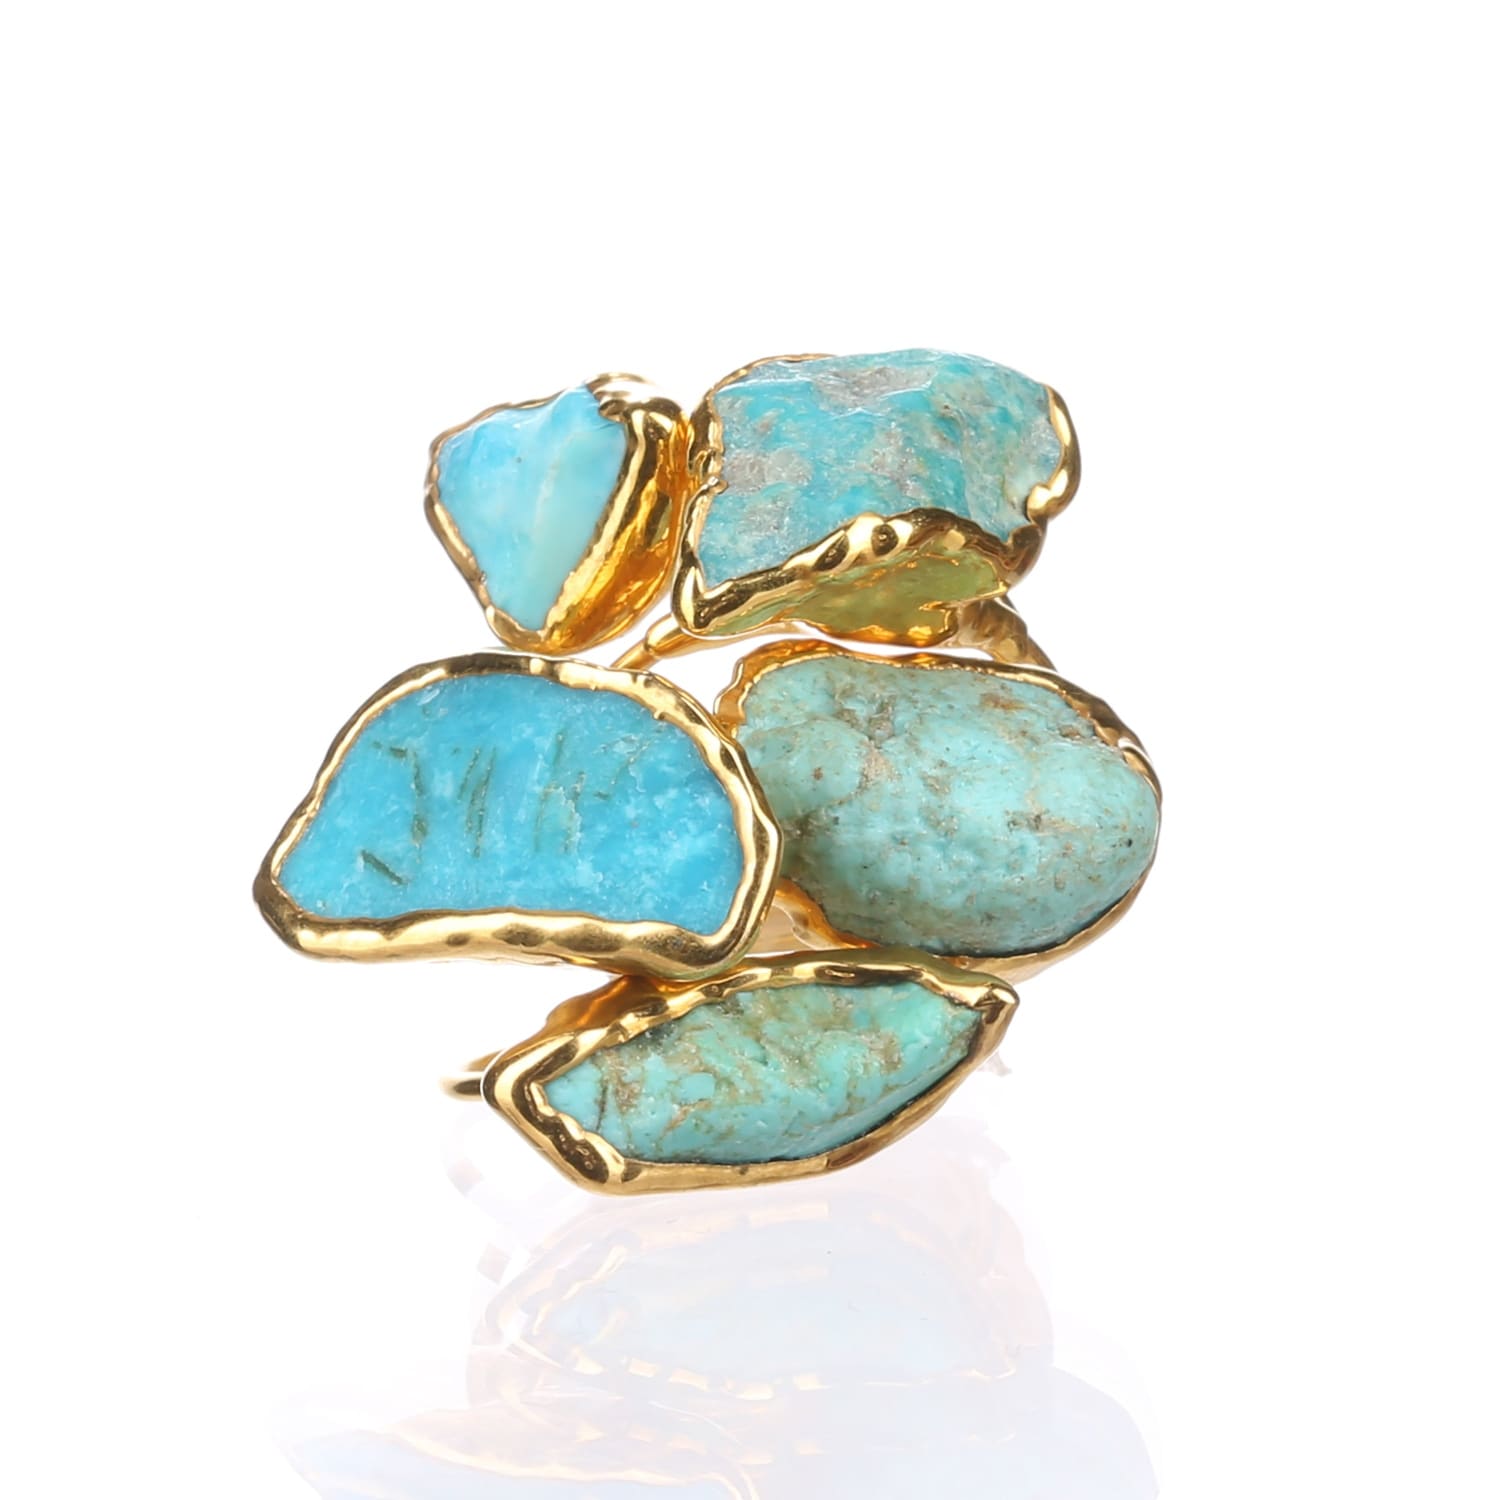 Large Raw Turquoise Ring in Rose Gold Gemstone Jewelry Rough